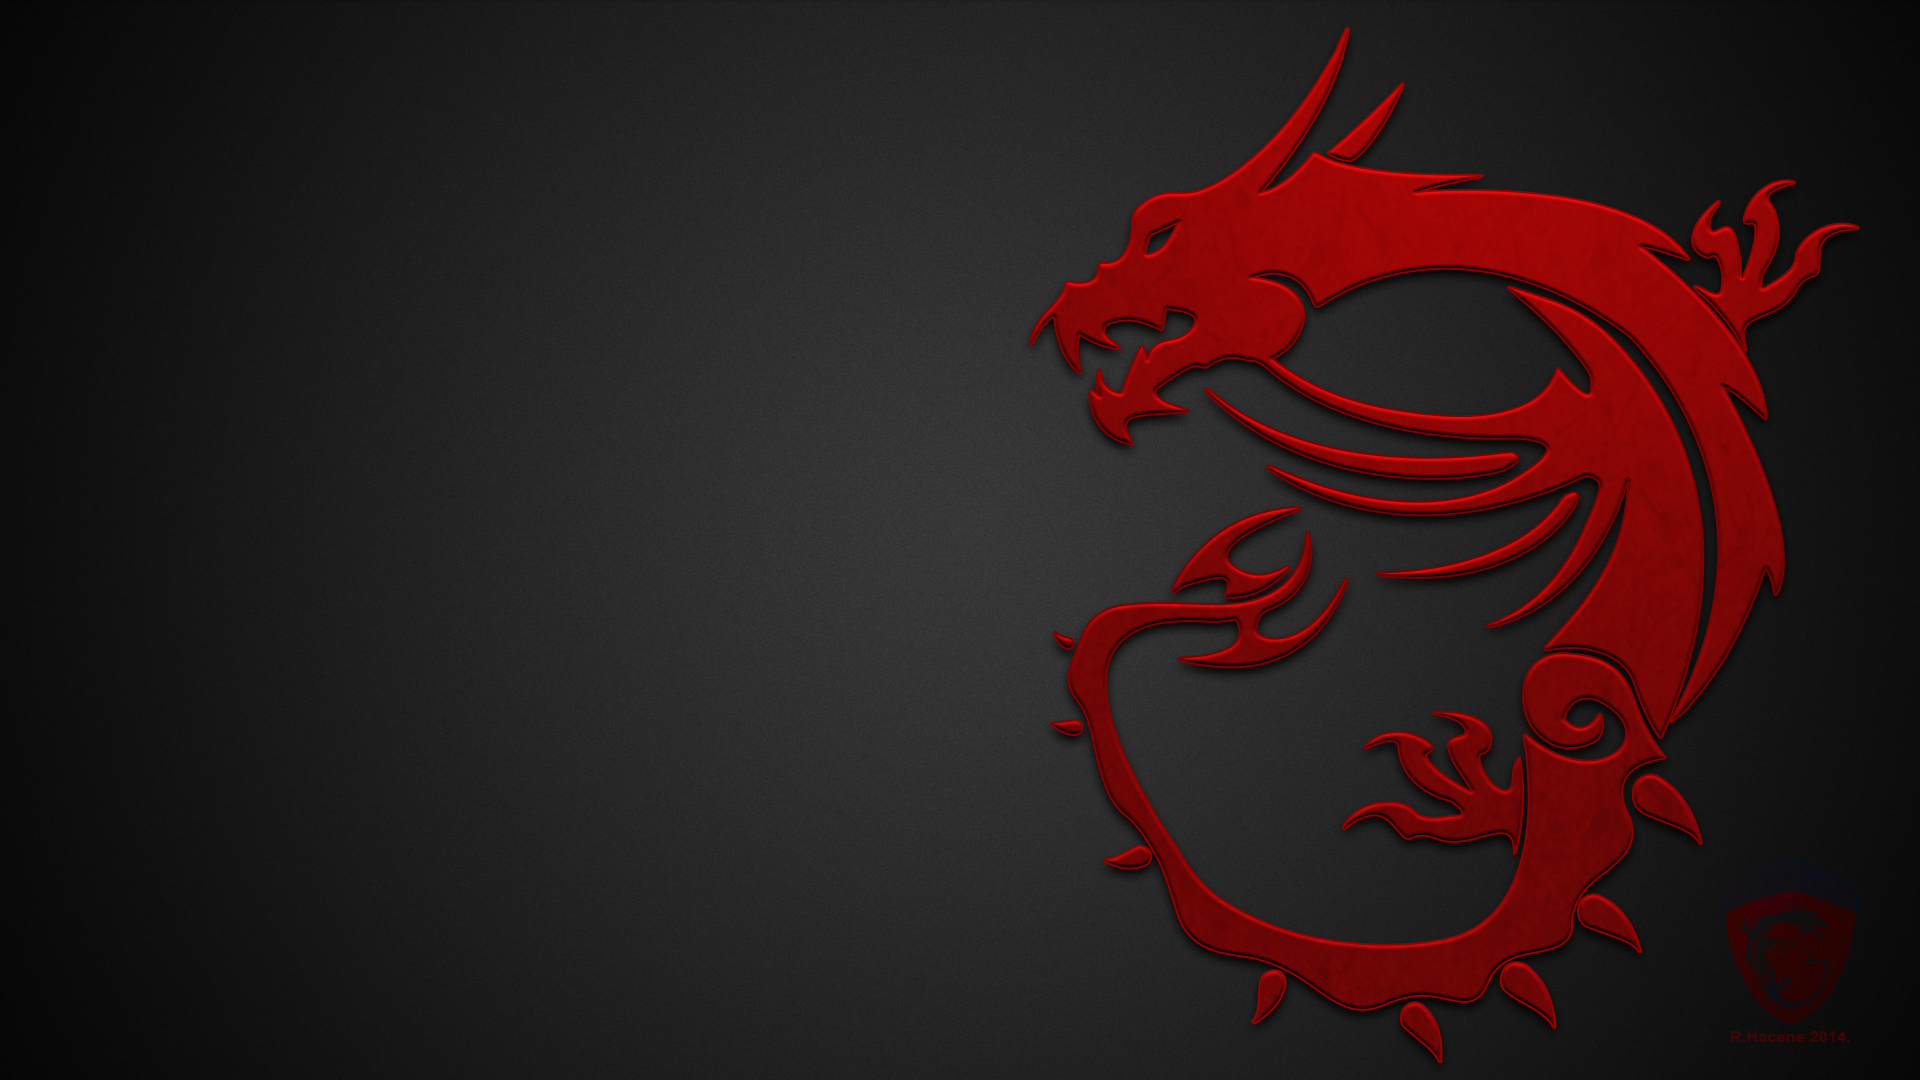 MSI Backgrounds, Compatible - PC, Mobile, Gadgets| 1920x1080 px